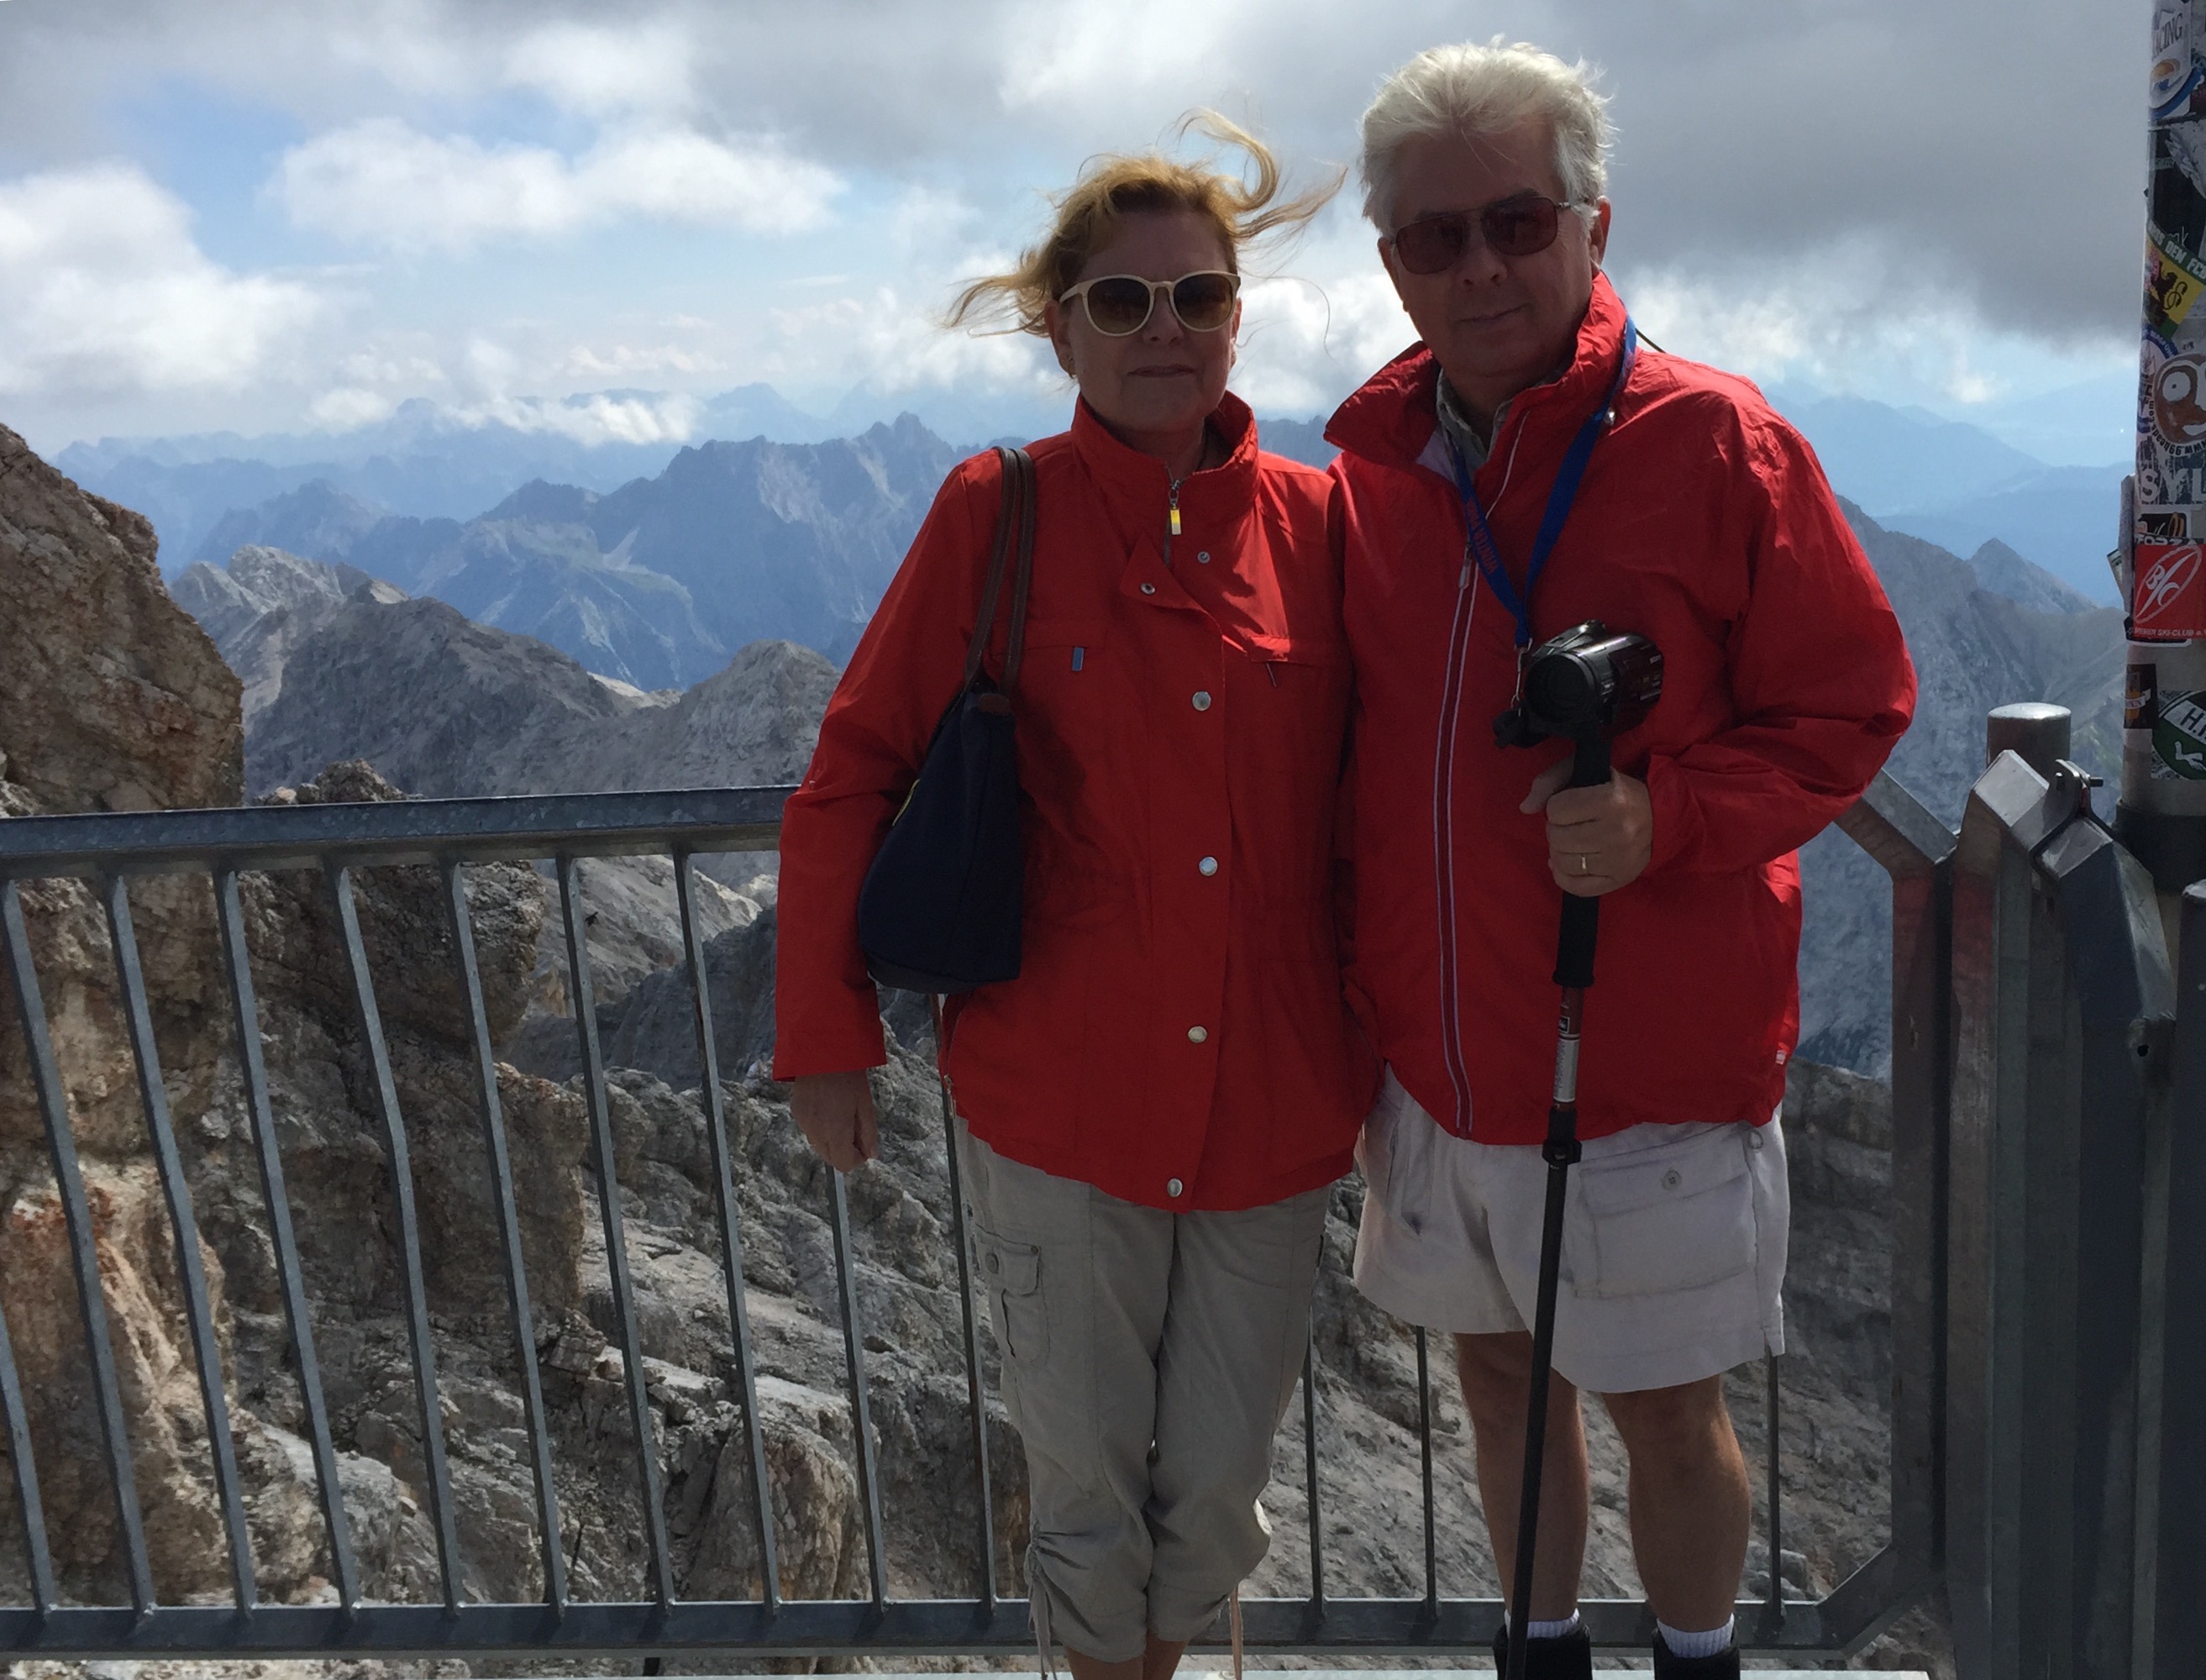 Don and Beate on top of the Zugspitze